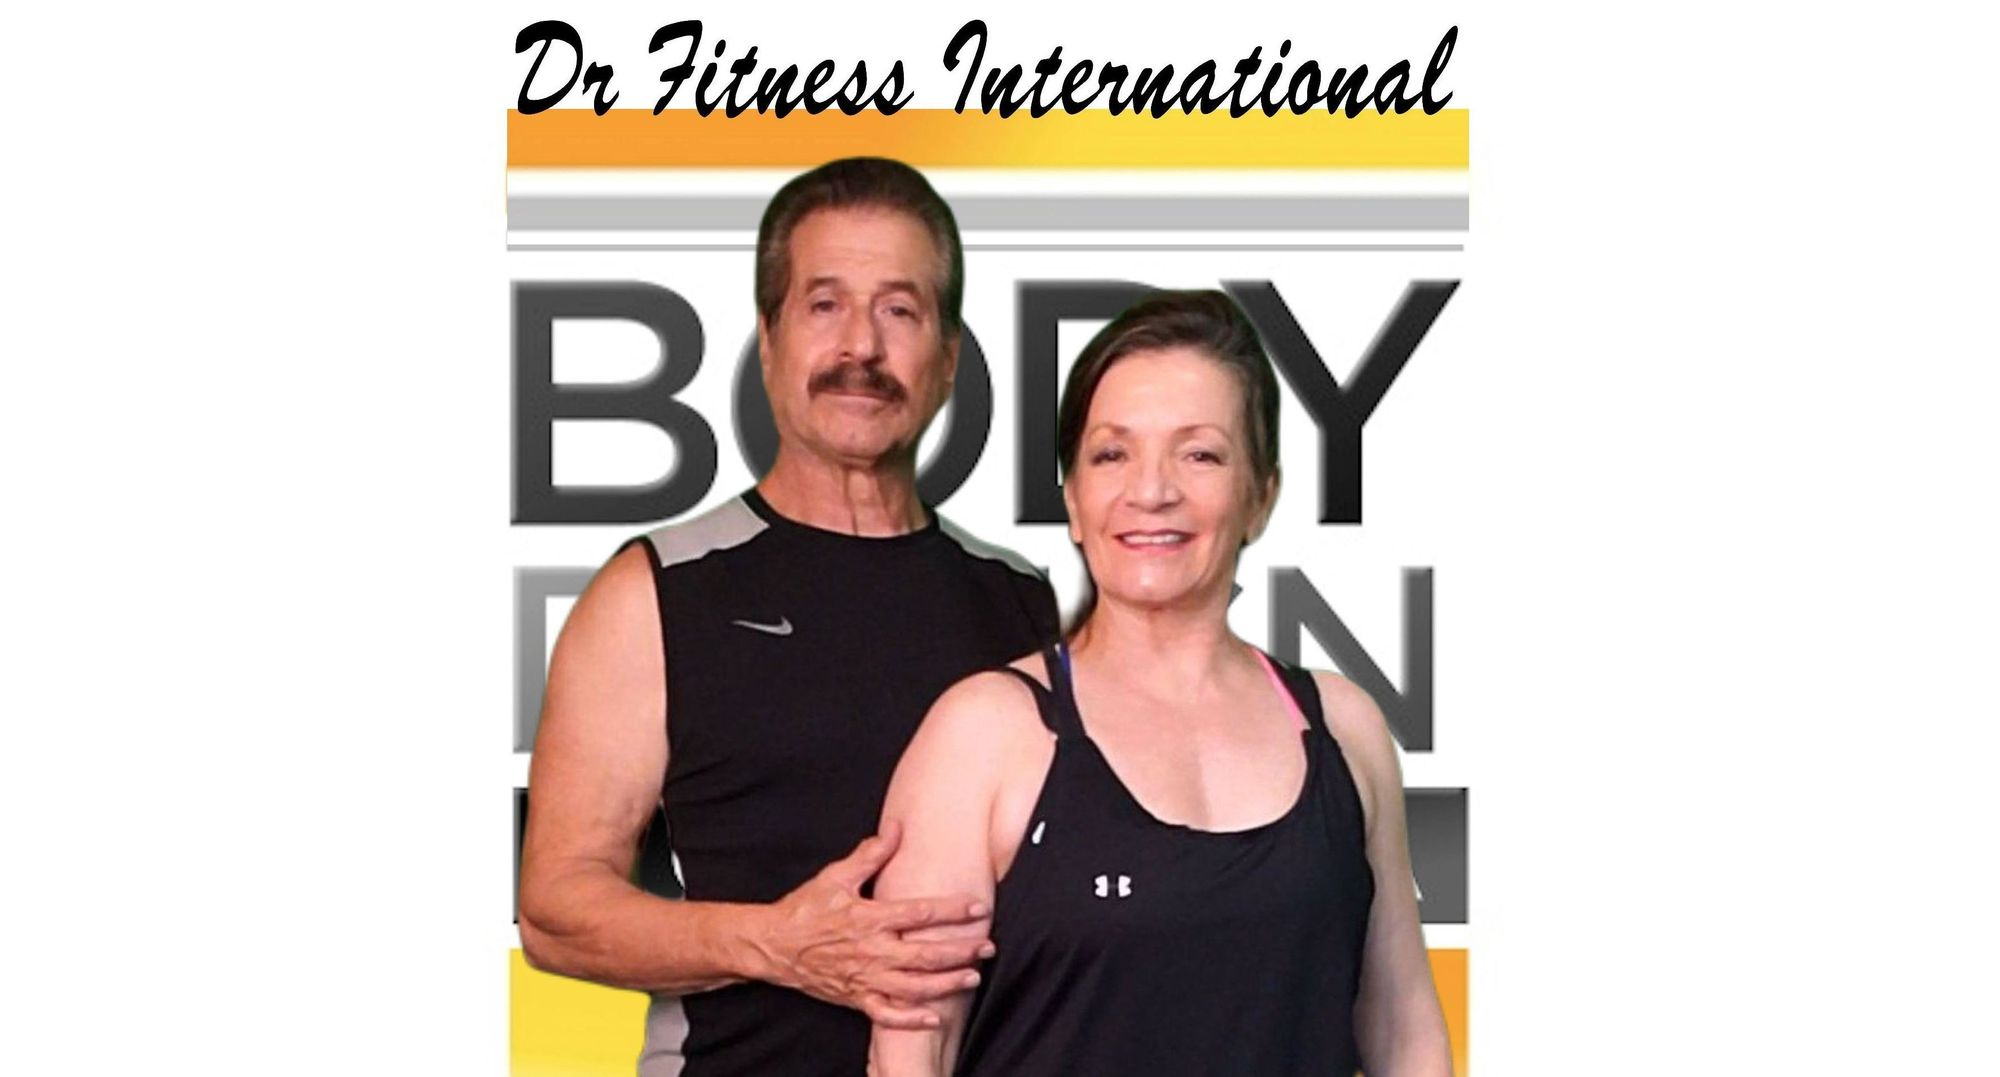 Where Dreams Become a Reality - Dr Fitness International